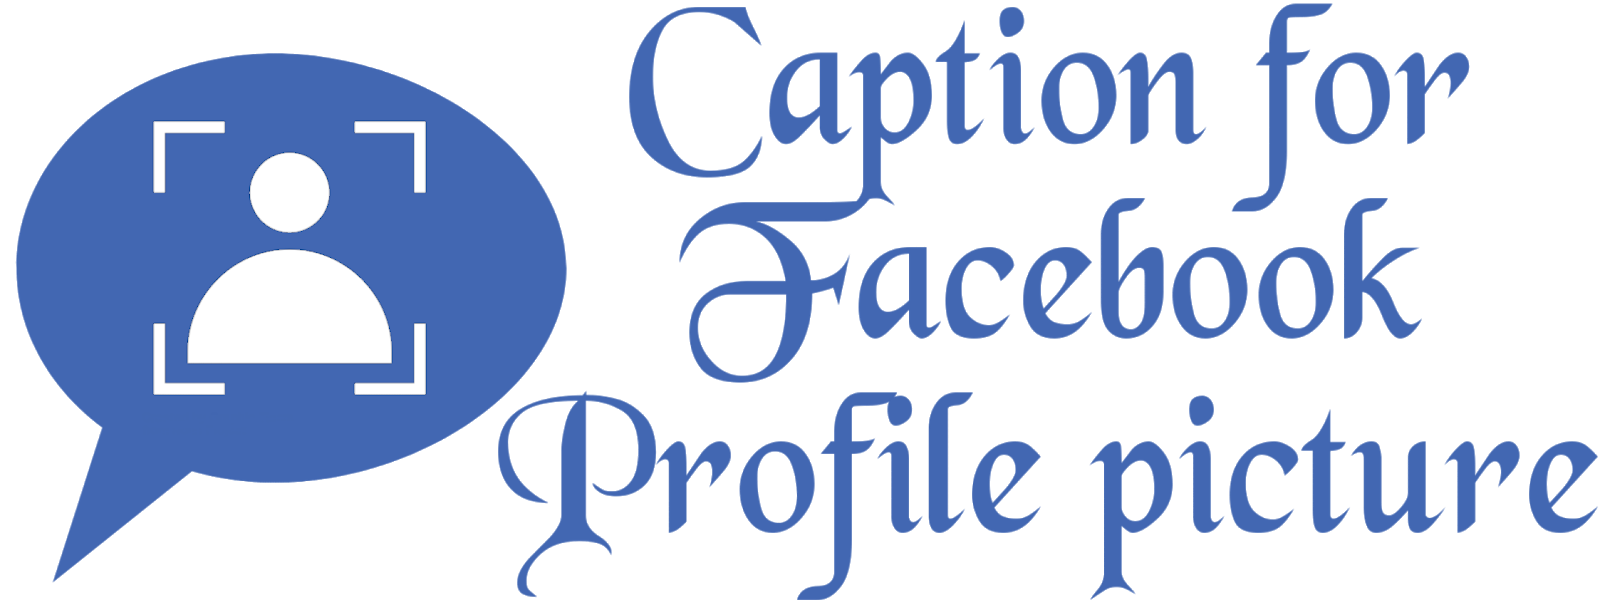 Caption for facebook profile pictures